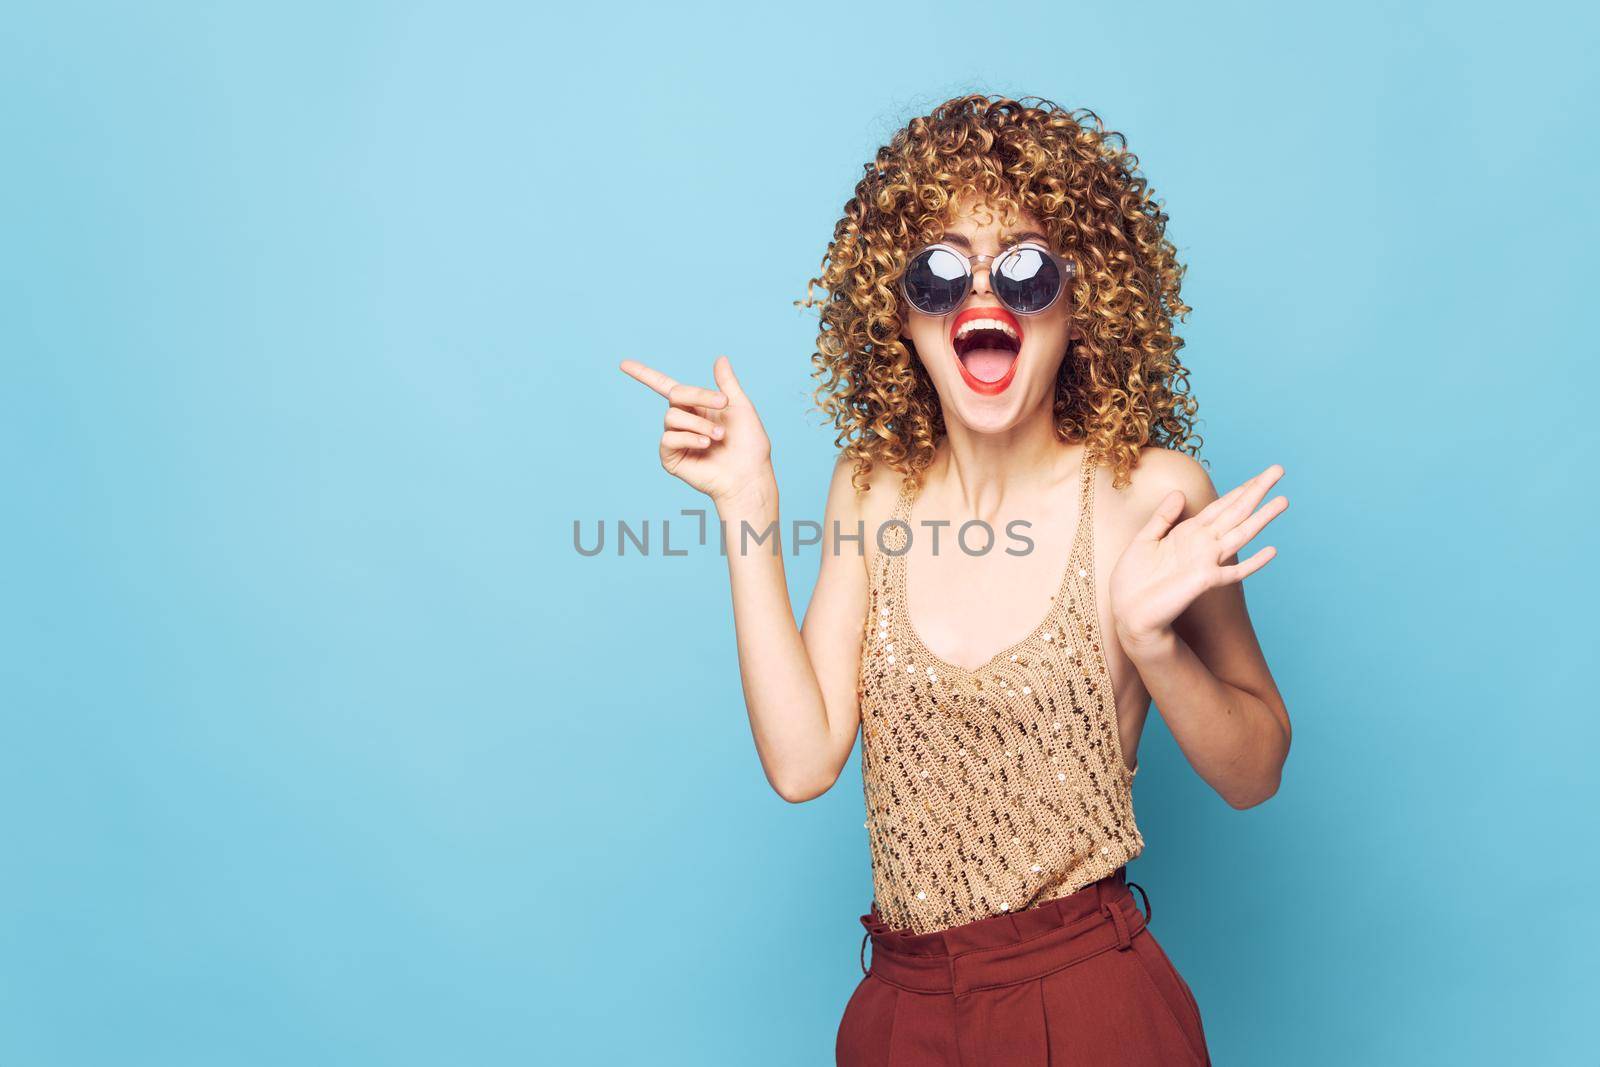 Charming model With his wide open mouth dark glasses gesturing with his hands Copy Space by SHOTPRIME